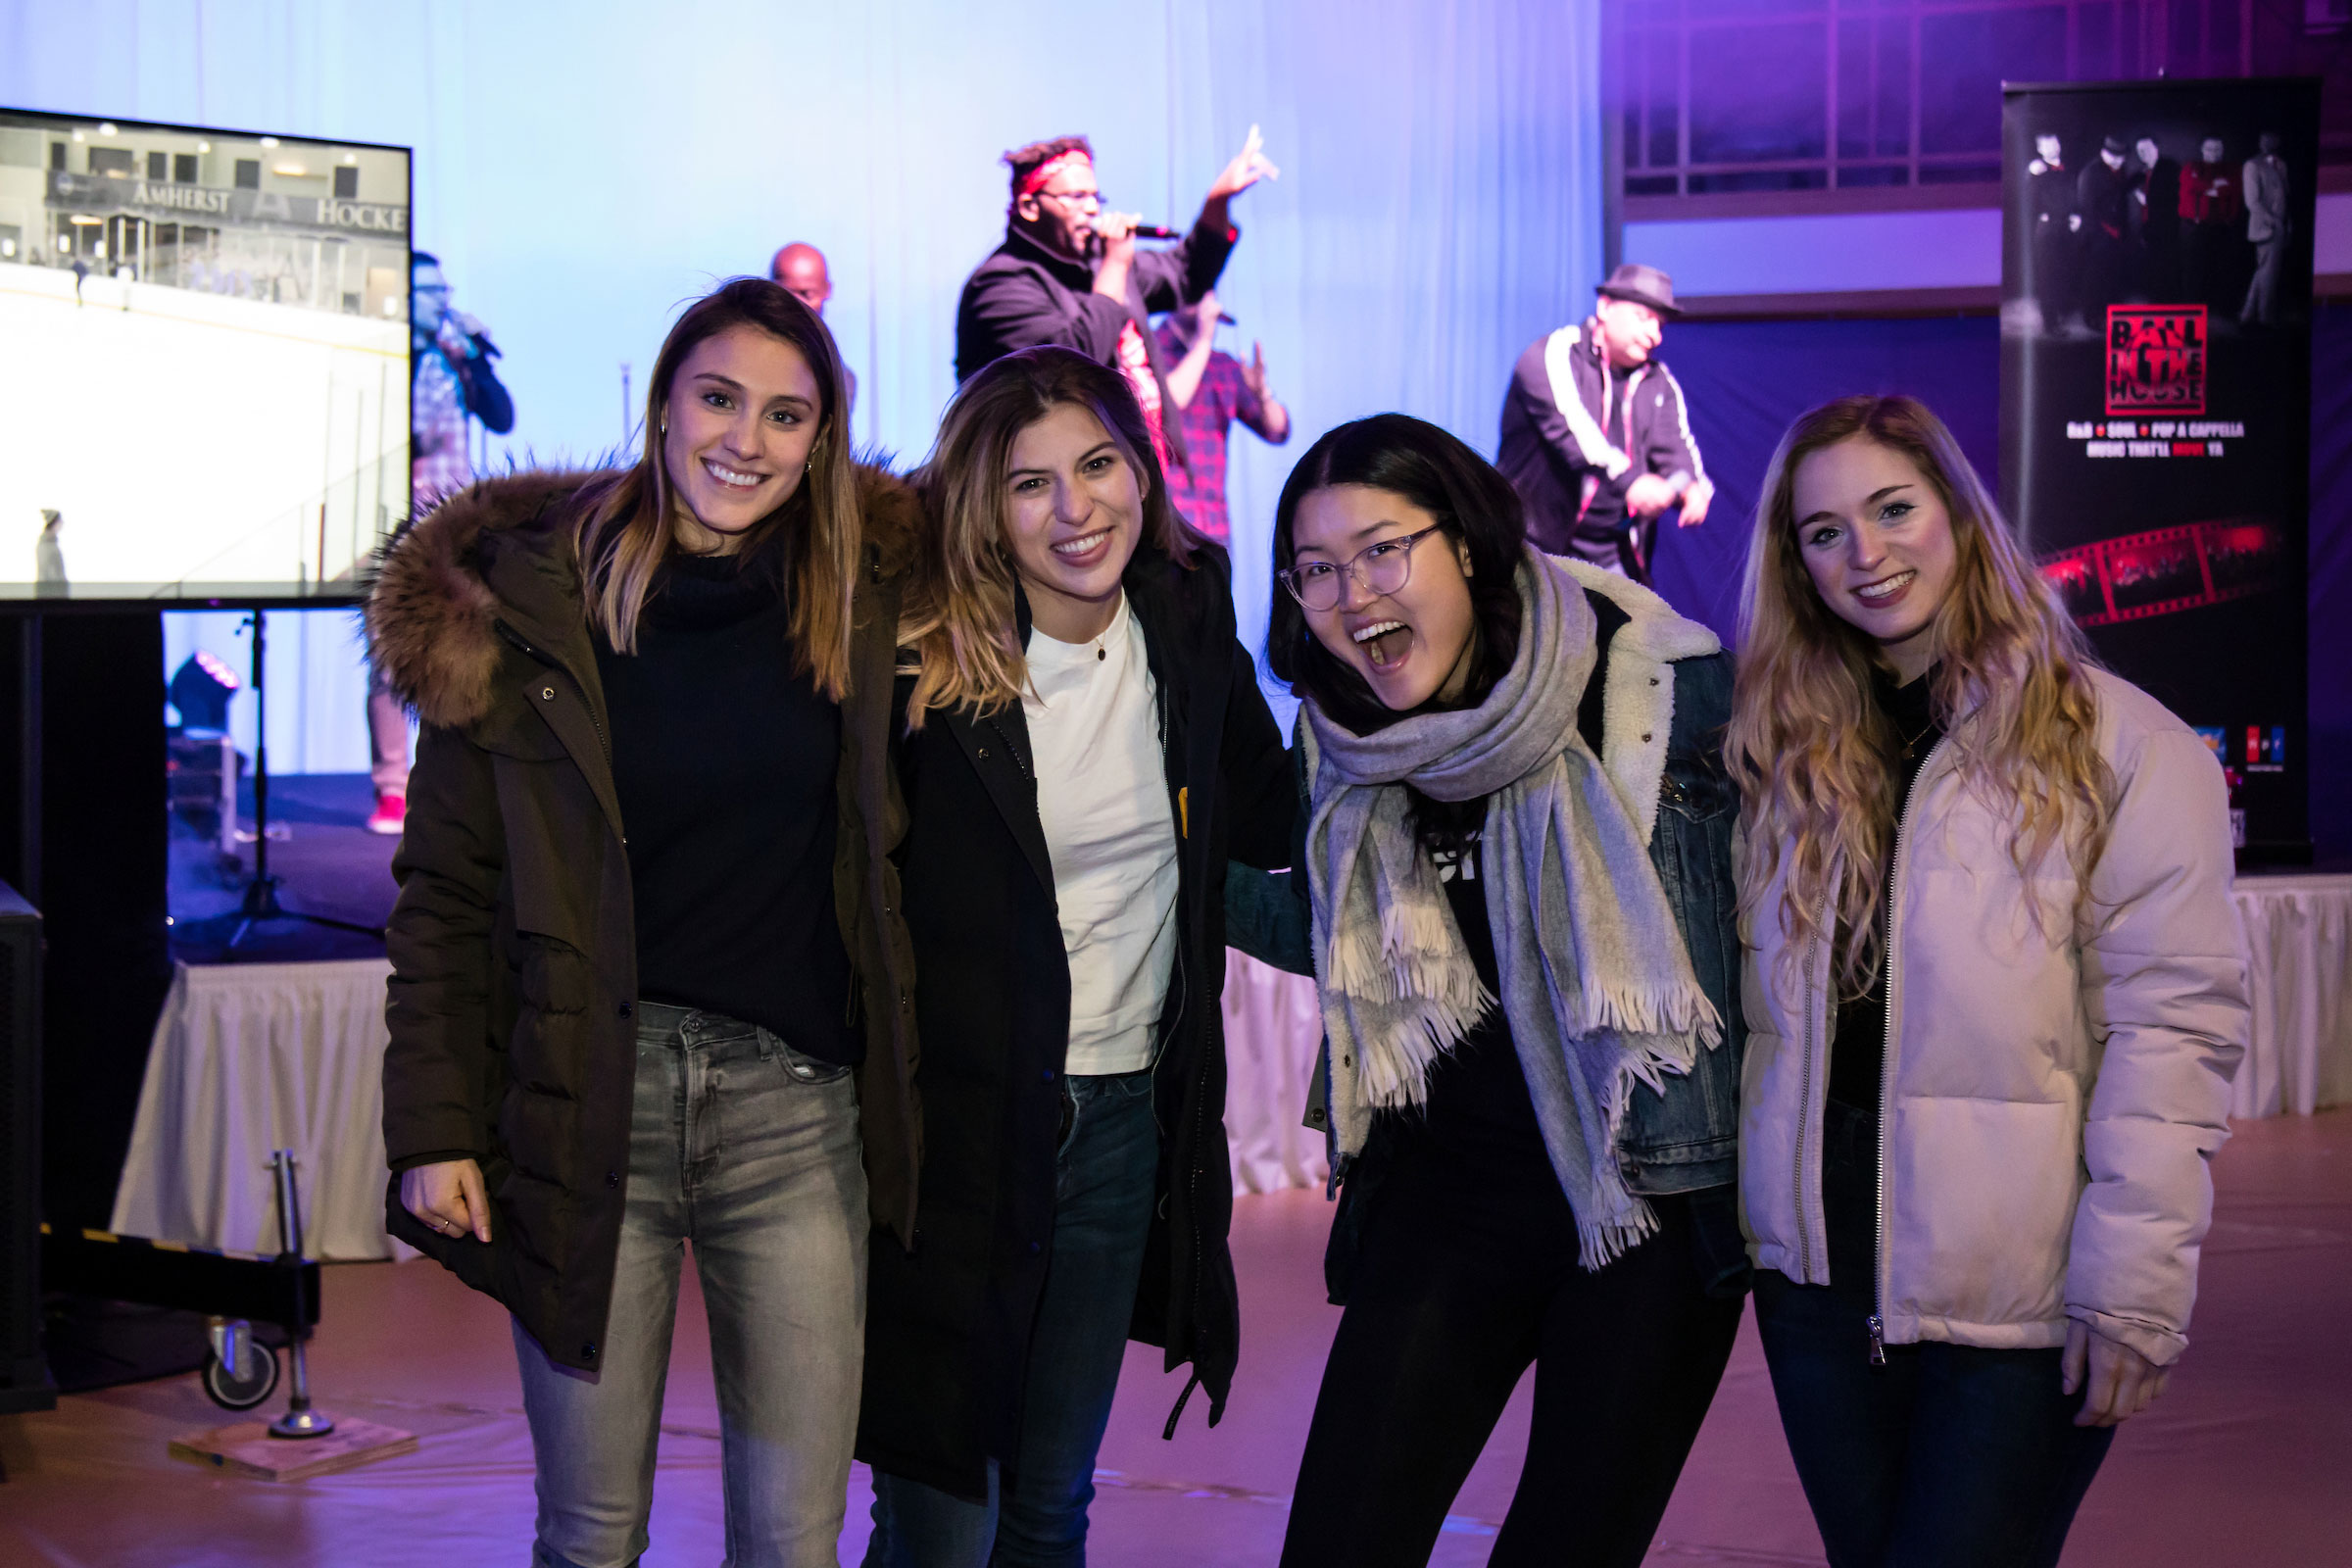 Four smiling women pose in front of the band at Winter Fest